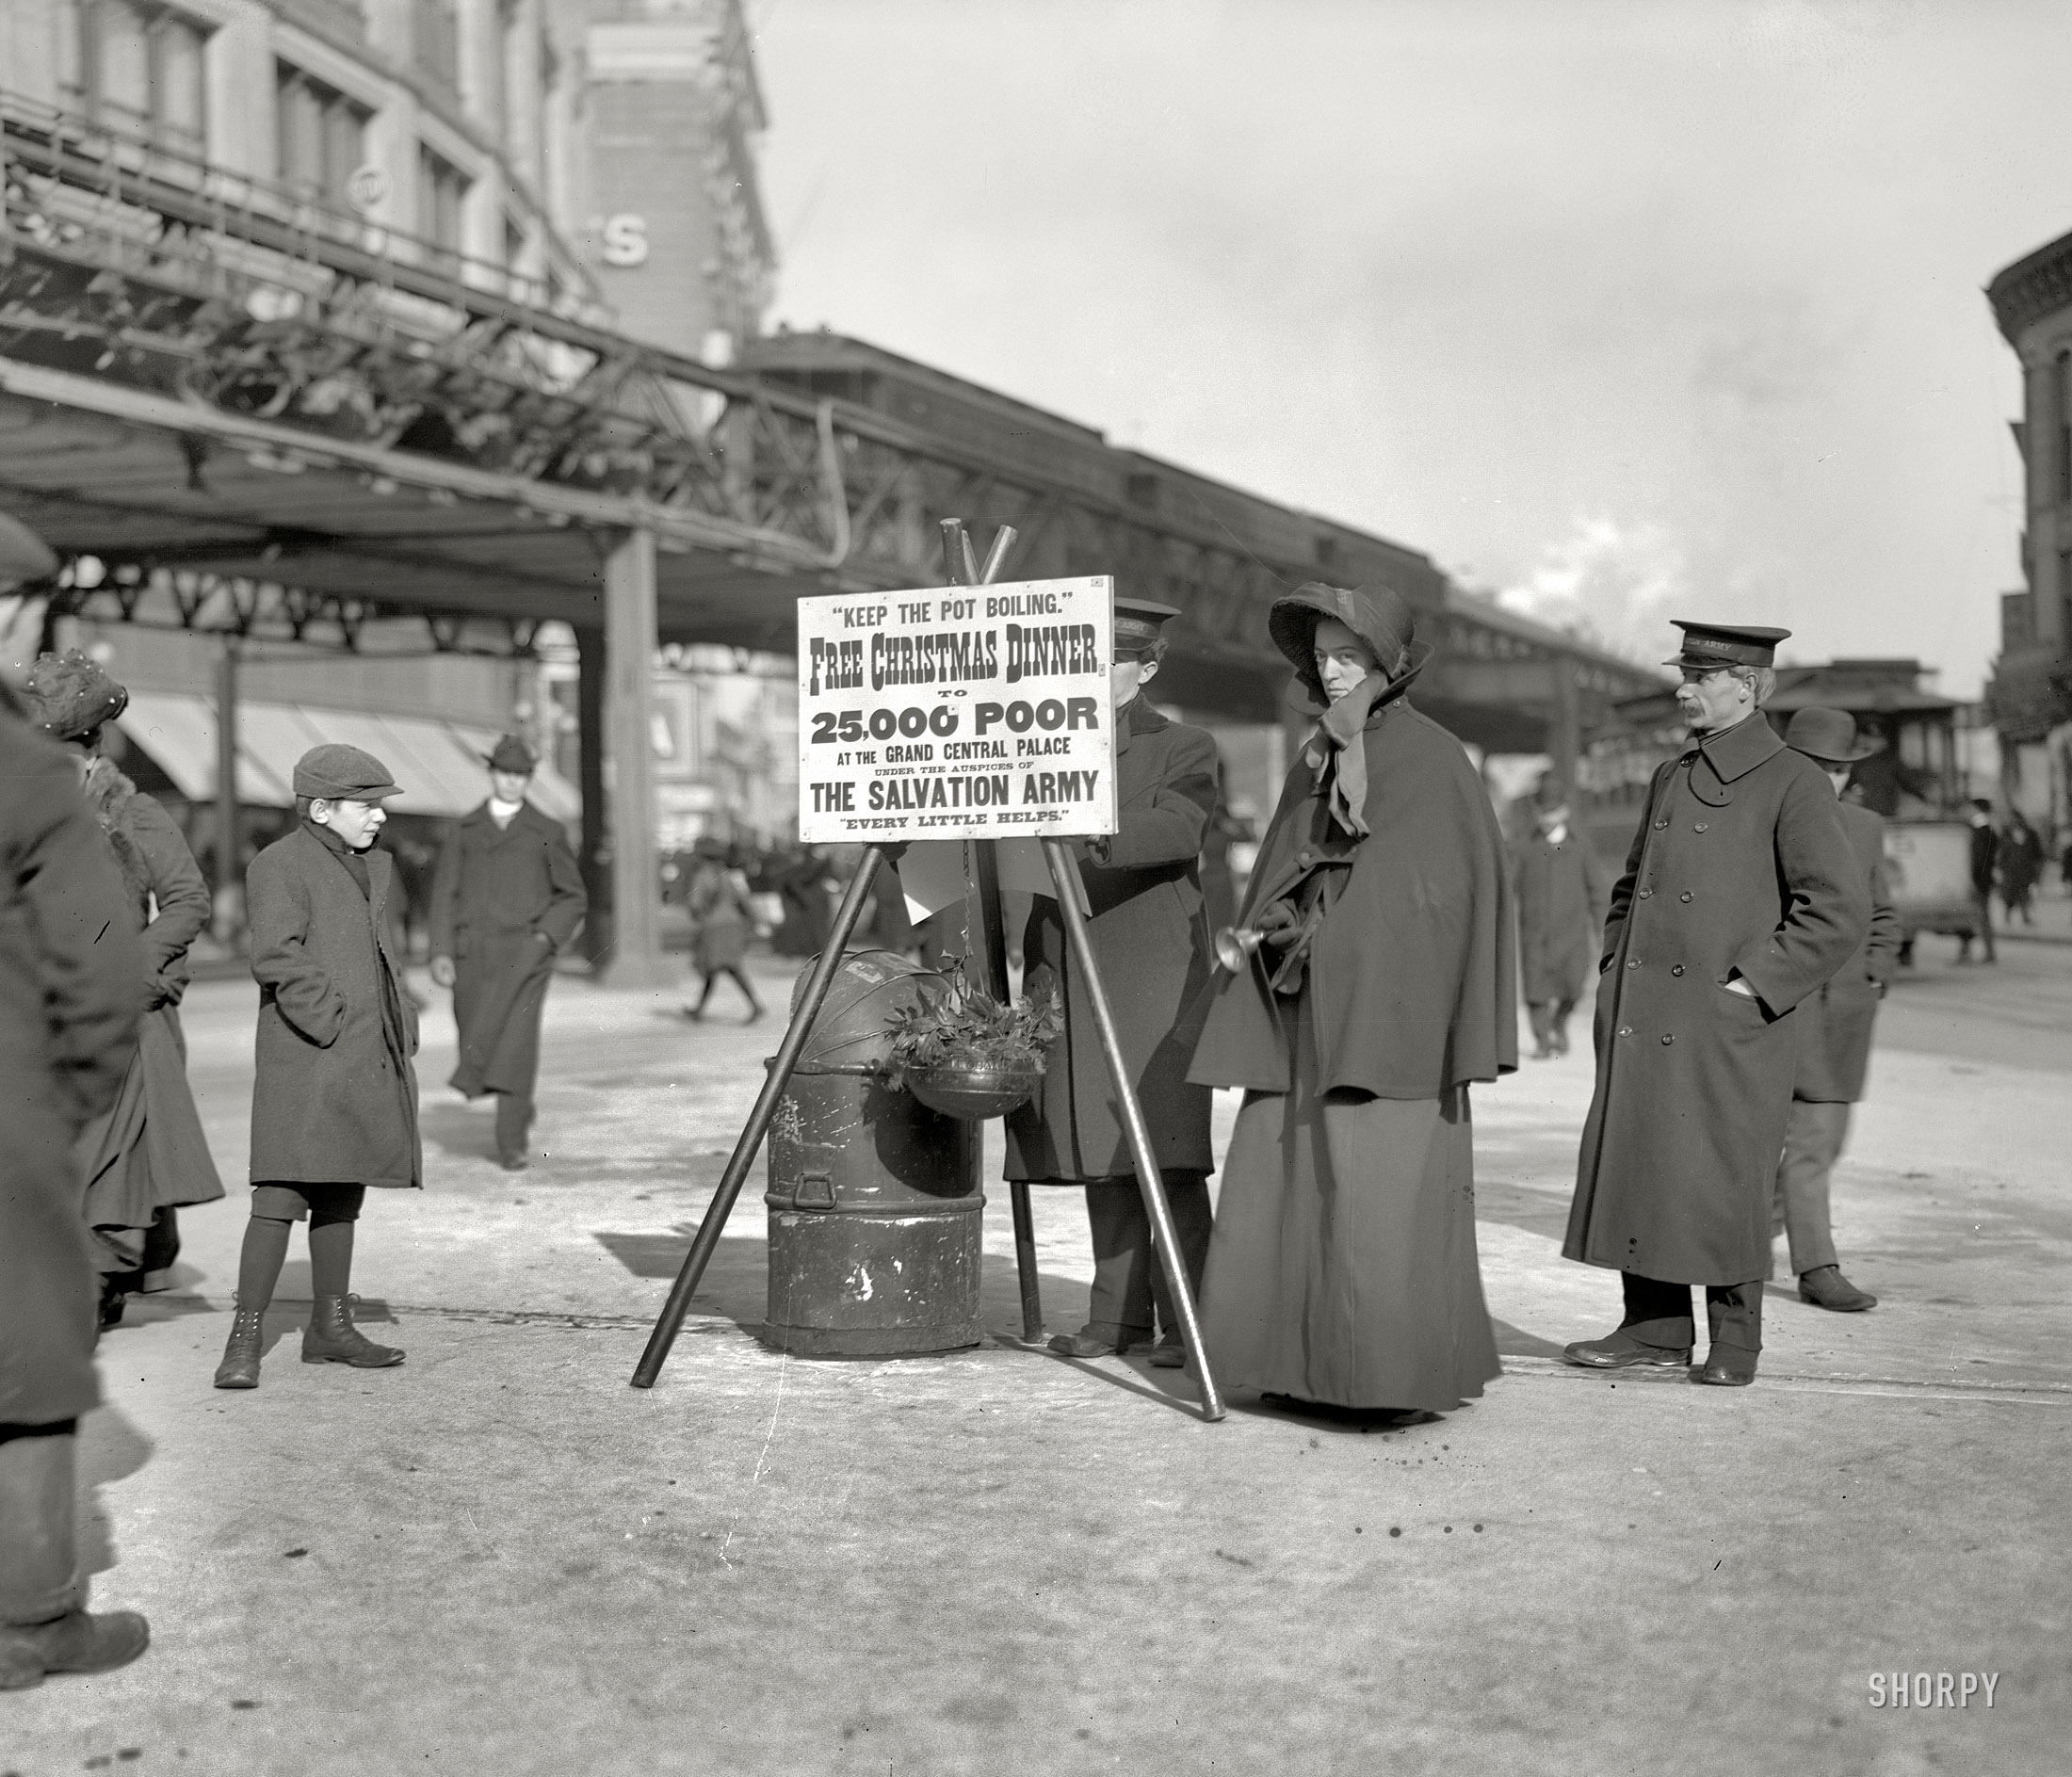 New York circa 1903. "Remember the poor: a Salvation Army Christmas box." 8x10 inch dry plate glass negative, Detroit Publishing Company. View full size.